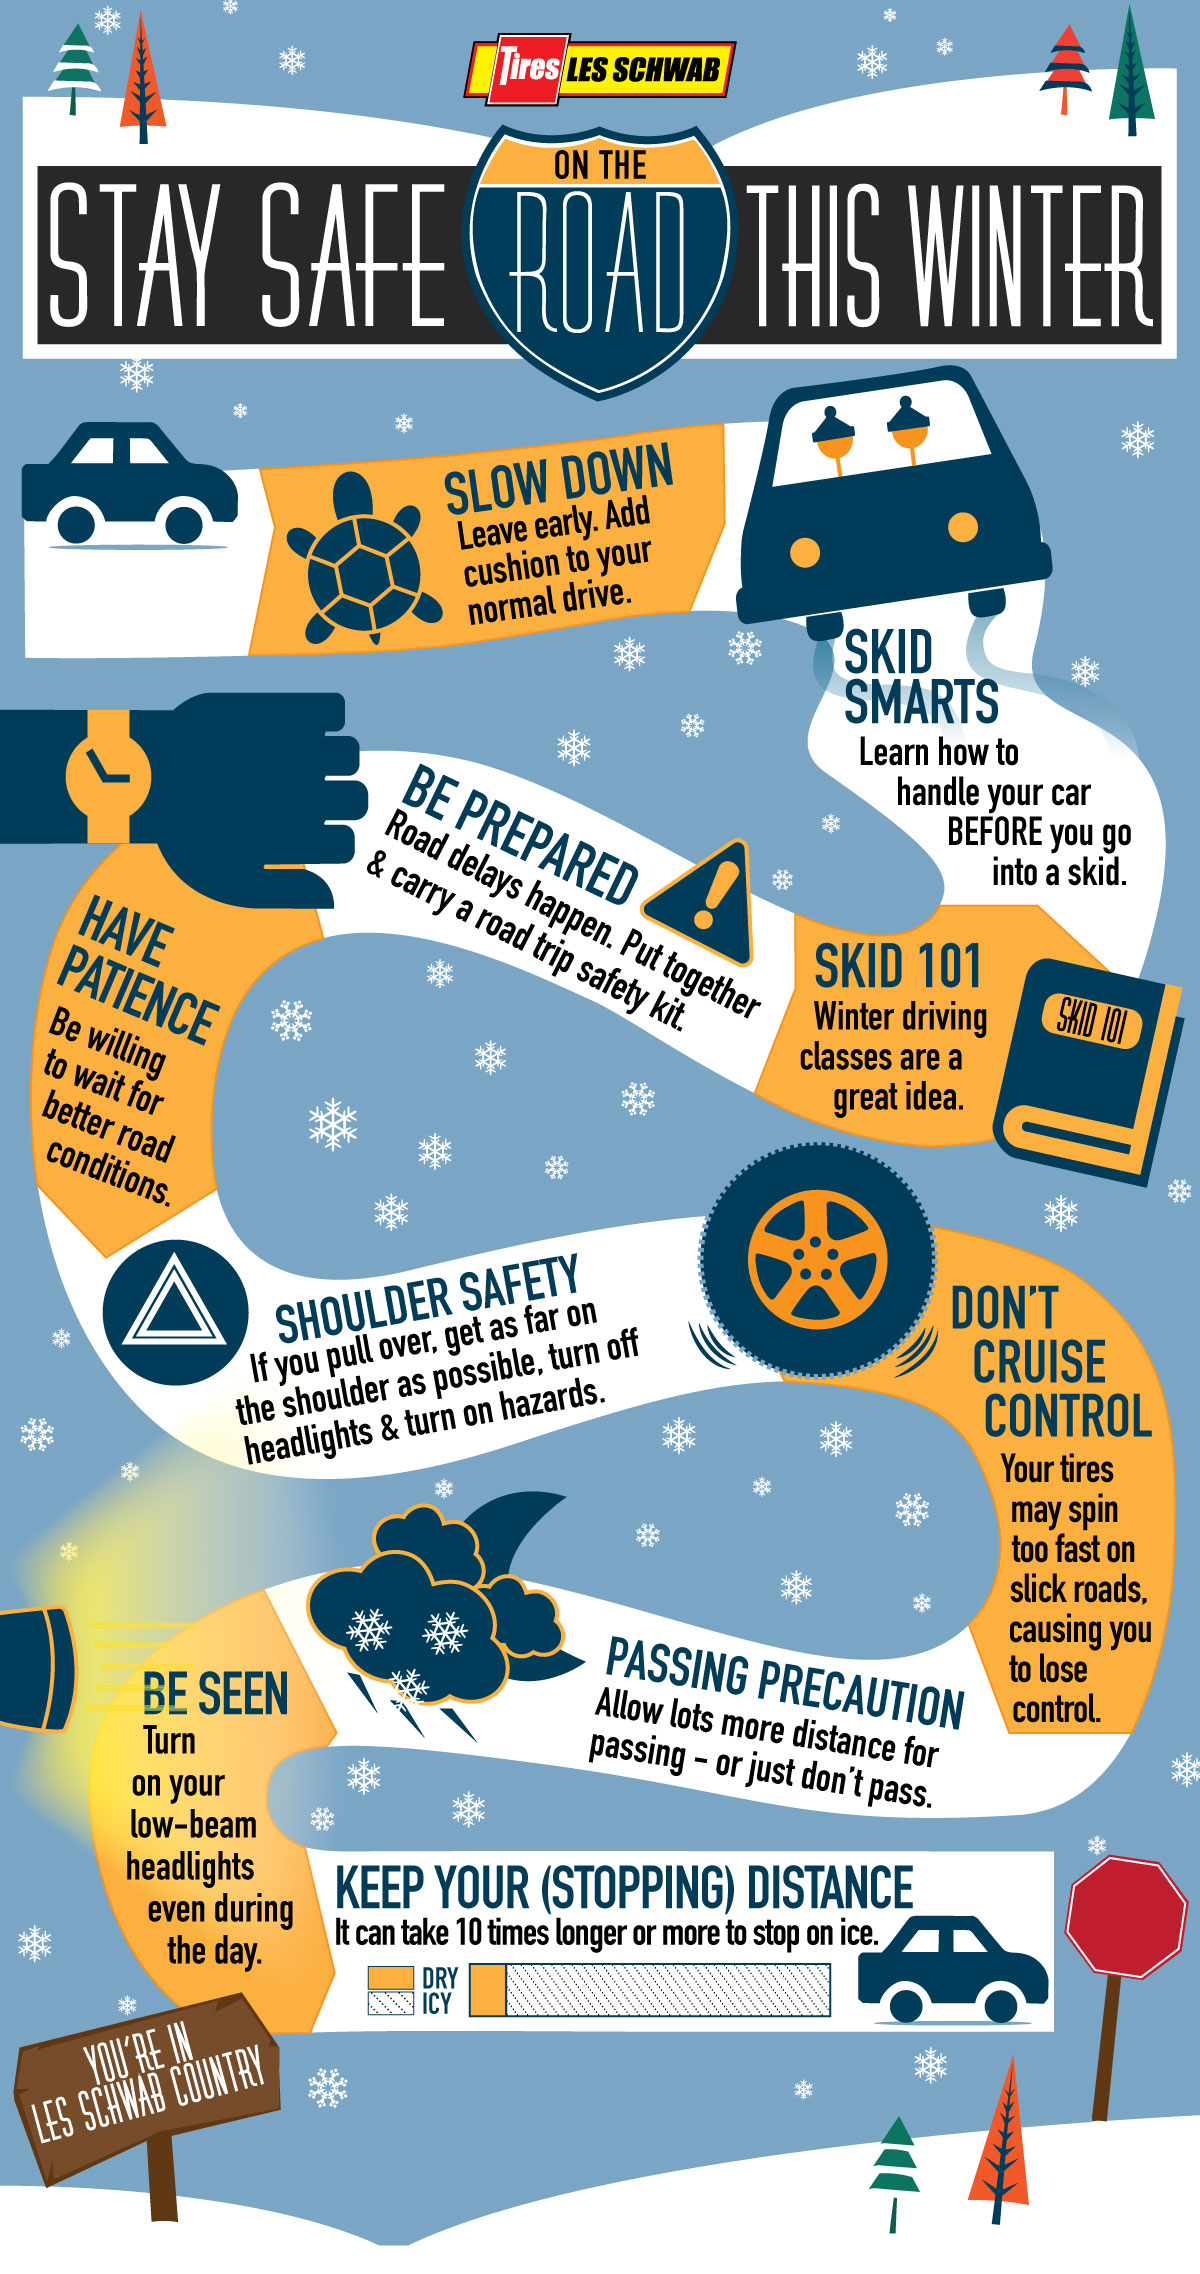 Winter Driving Safety Essentials : r/coolguides